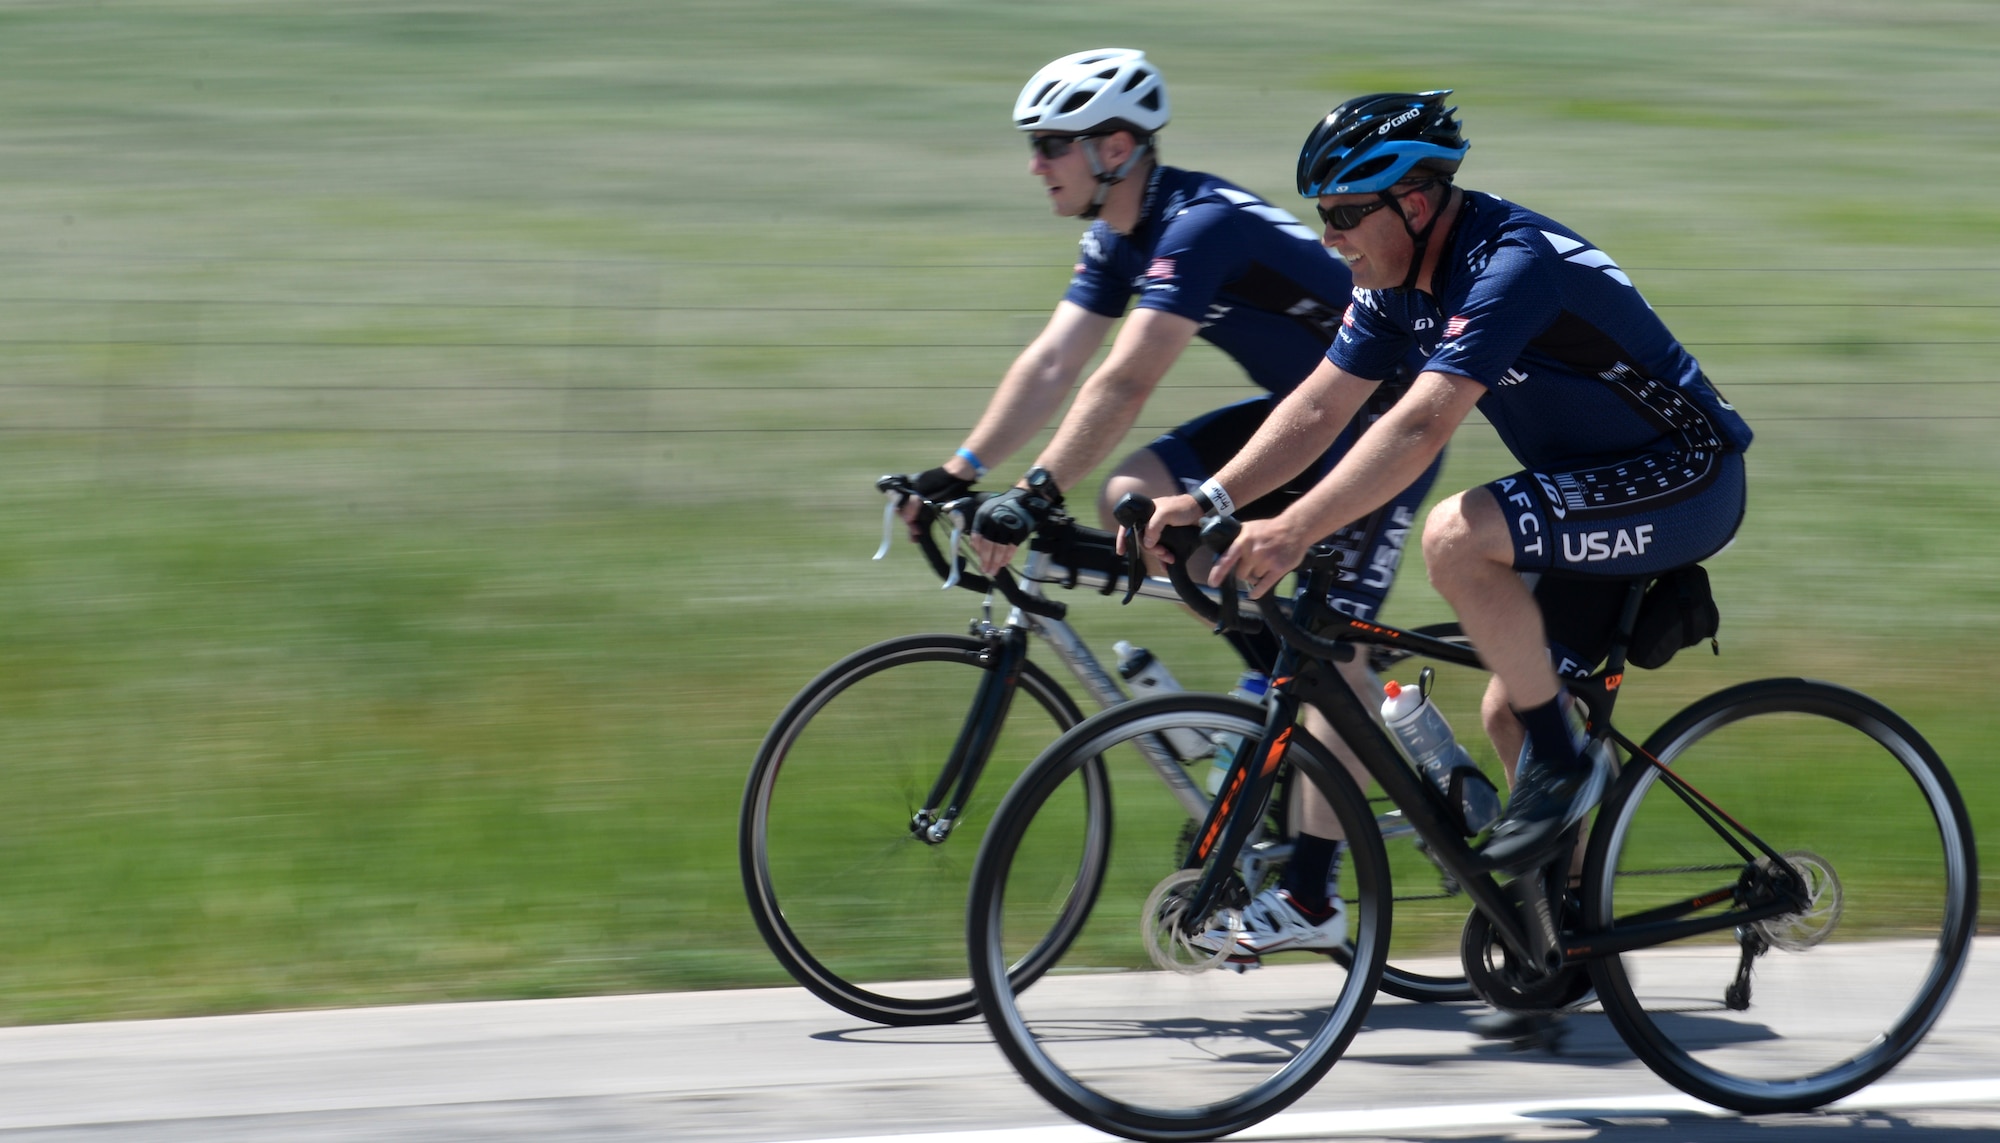 Maj. Anthony Bares, the director of wing inspections assigned to the 28th Bomb Wing Inspector General office, front, and Capt. Eben Engler, a B-1 bomber weapon systems officer assigned to the 34th Bomb Squadron, back, cycle toward Caputa, S.D., during the Ride Across South Dakota, June 4, 2017. The ride was one of two local events members of the Dakota Regional Air Force Cycling Team participated in as preparation for the Register’s Annual Great Bicycle Ride Across Iowa July 23-29. (U.S. Air Force photo by Airman 1st Class Thomas Karol)